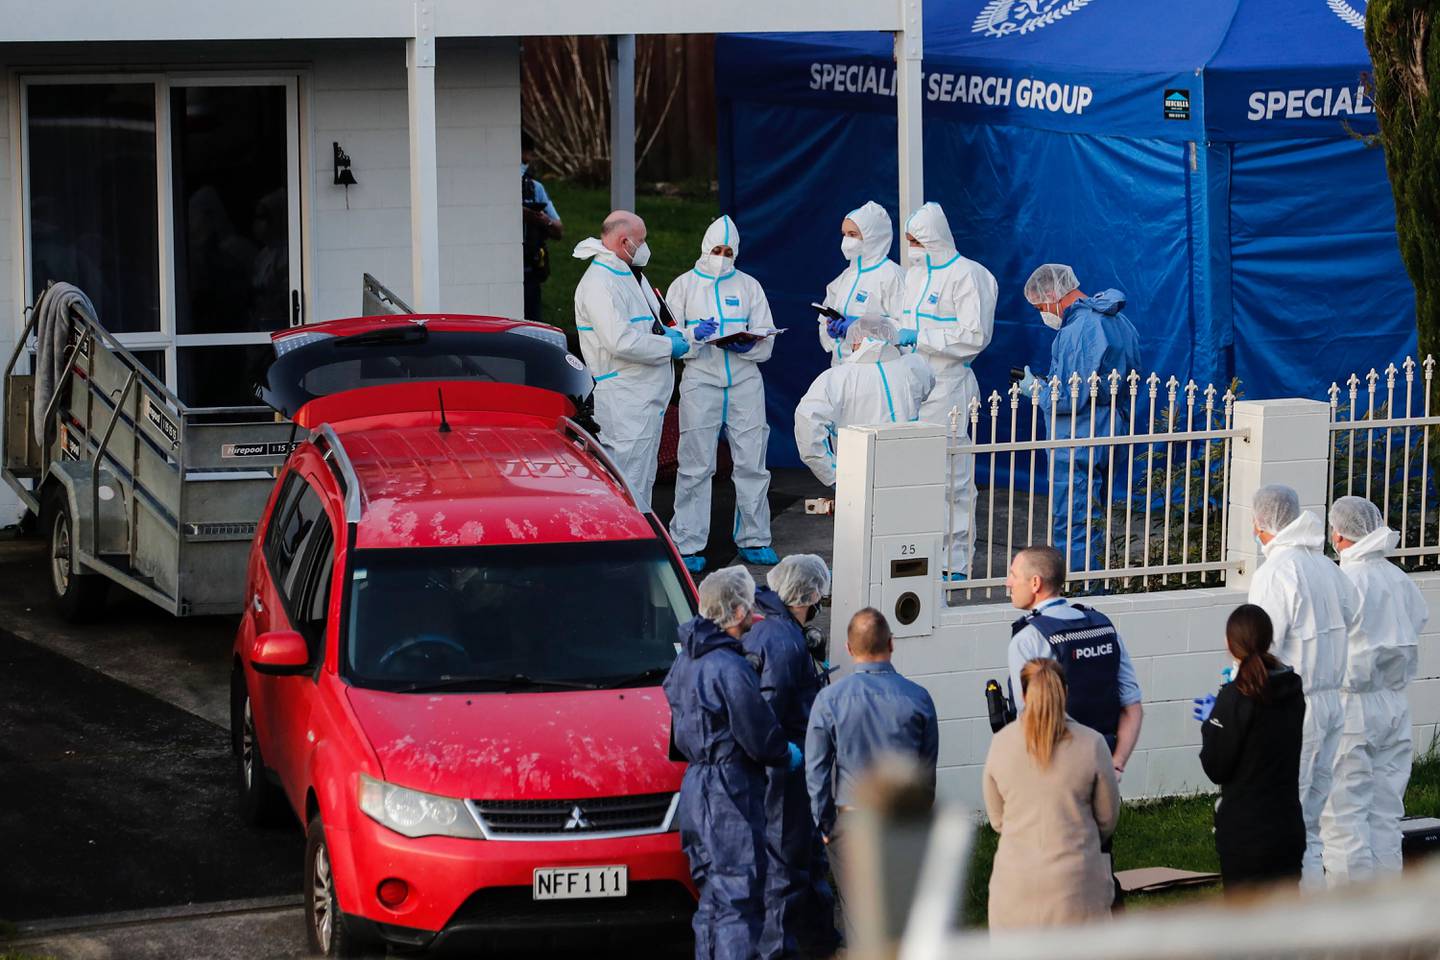 Police investigators in Auckland on August 11 after the remains were discovered in suitcases bought at an auction. AP